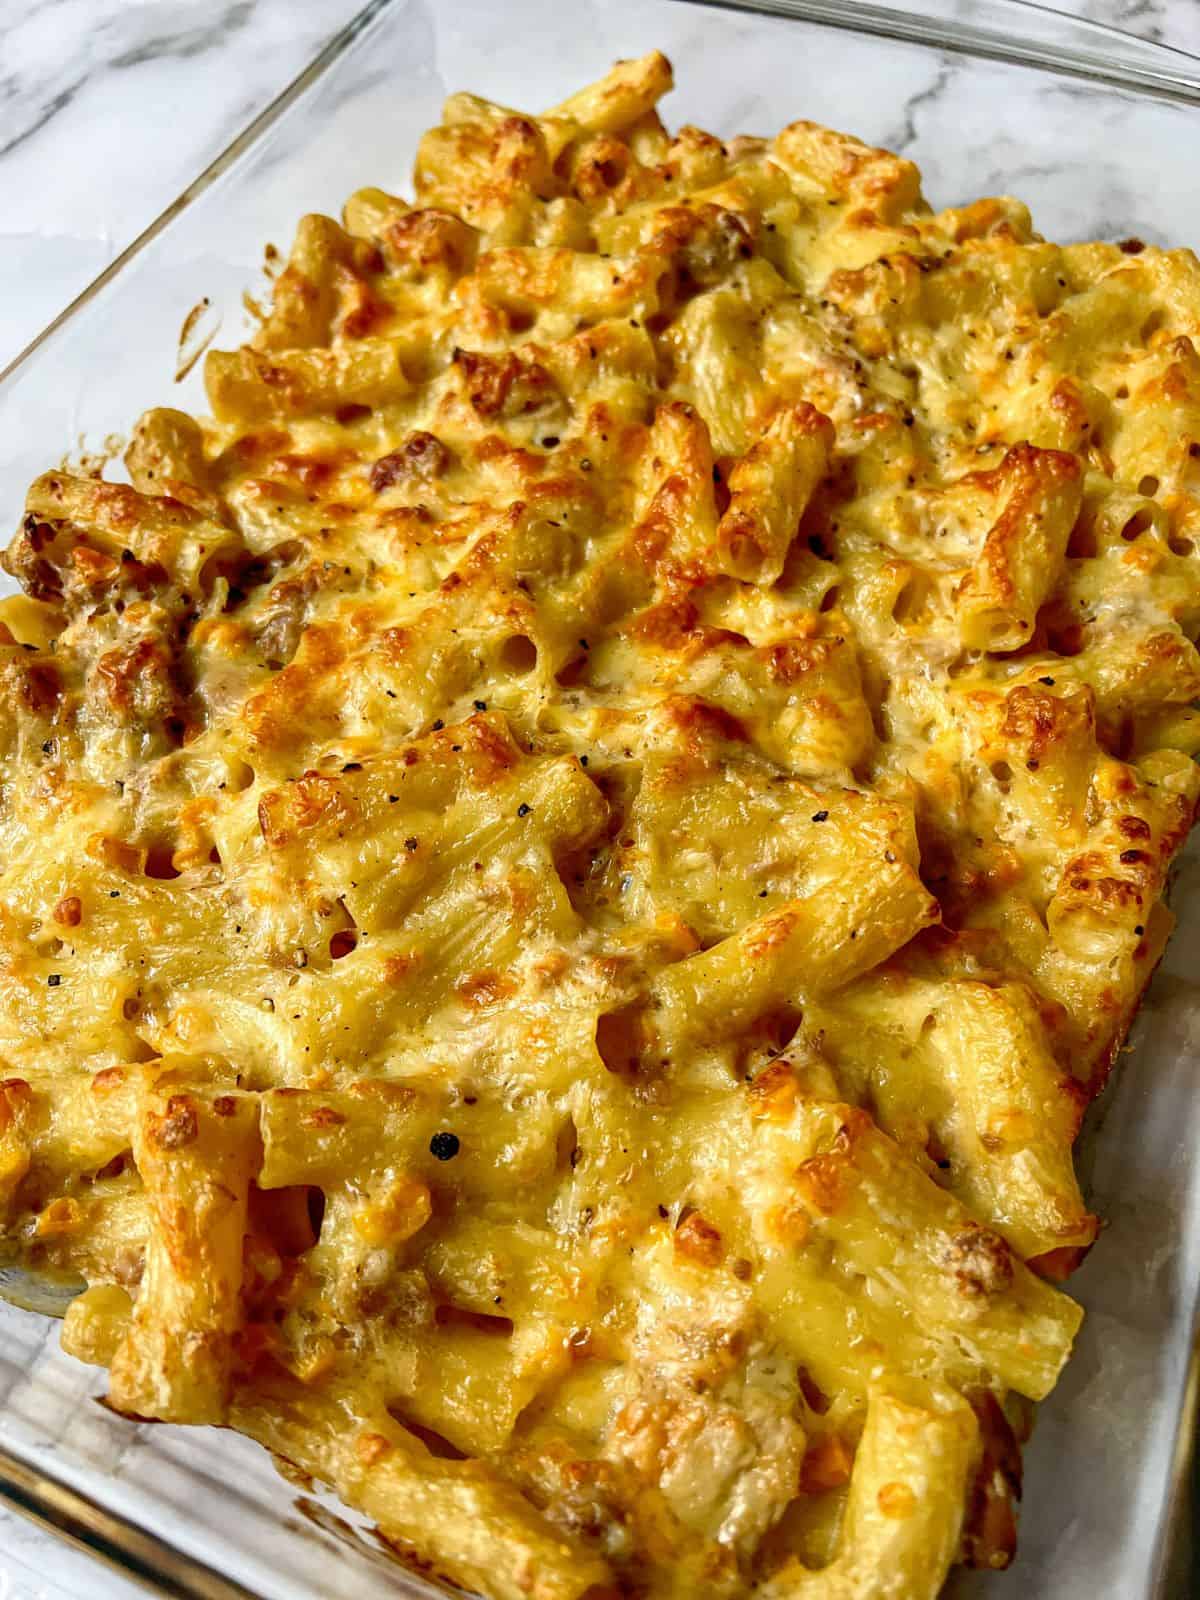 Pasta bake topped with cheese in a rectangle baking dish.